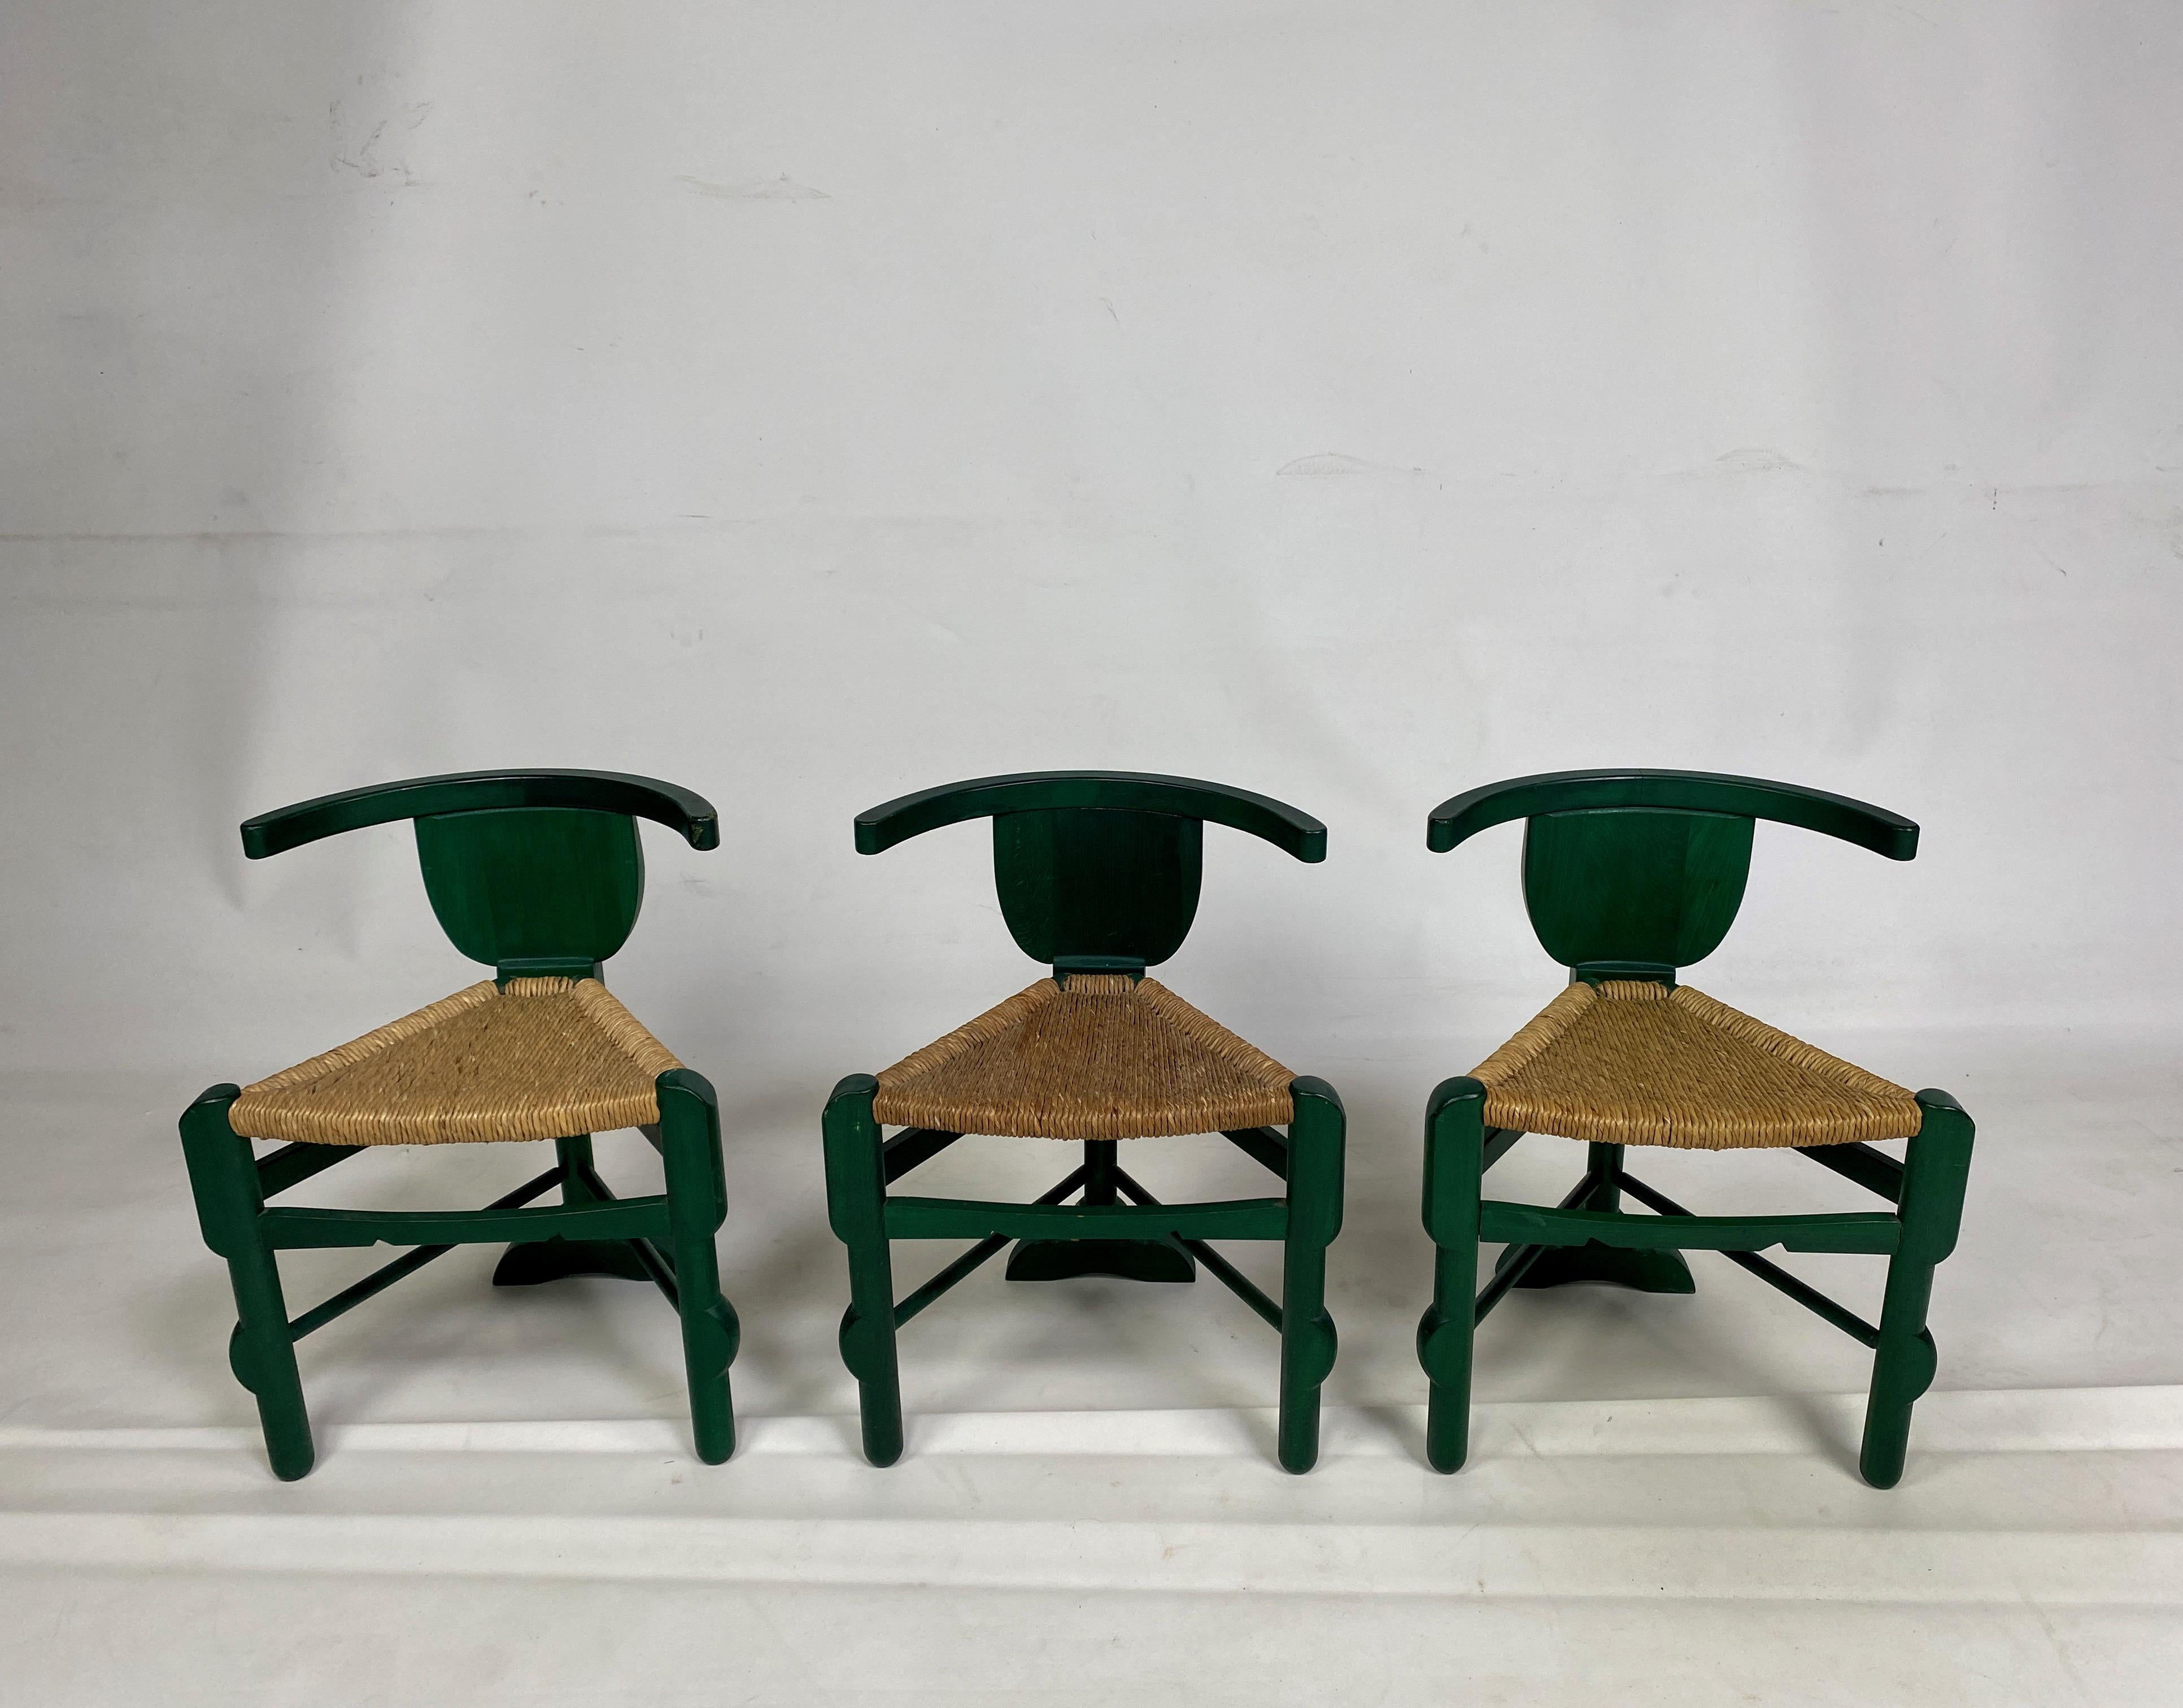 Three side chairs

After a design by Bernhard Hoetger

Rare chairs in stained oak, triangular structure with a backrest surmounted by a curved headband with a braided rush seat. The rear leg with geometric cutouts resting on a block